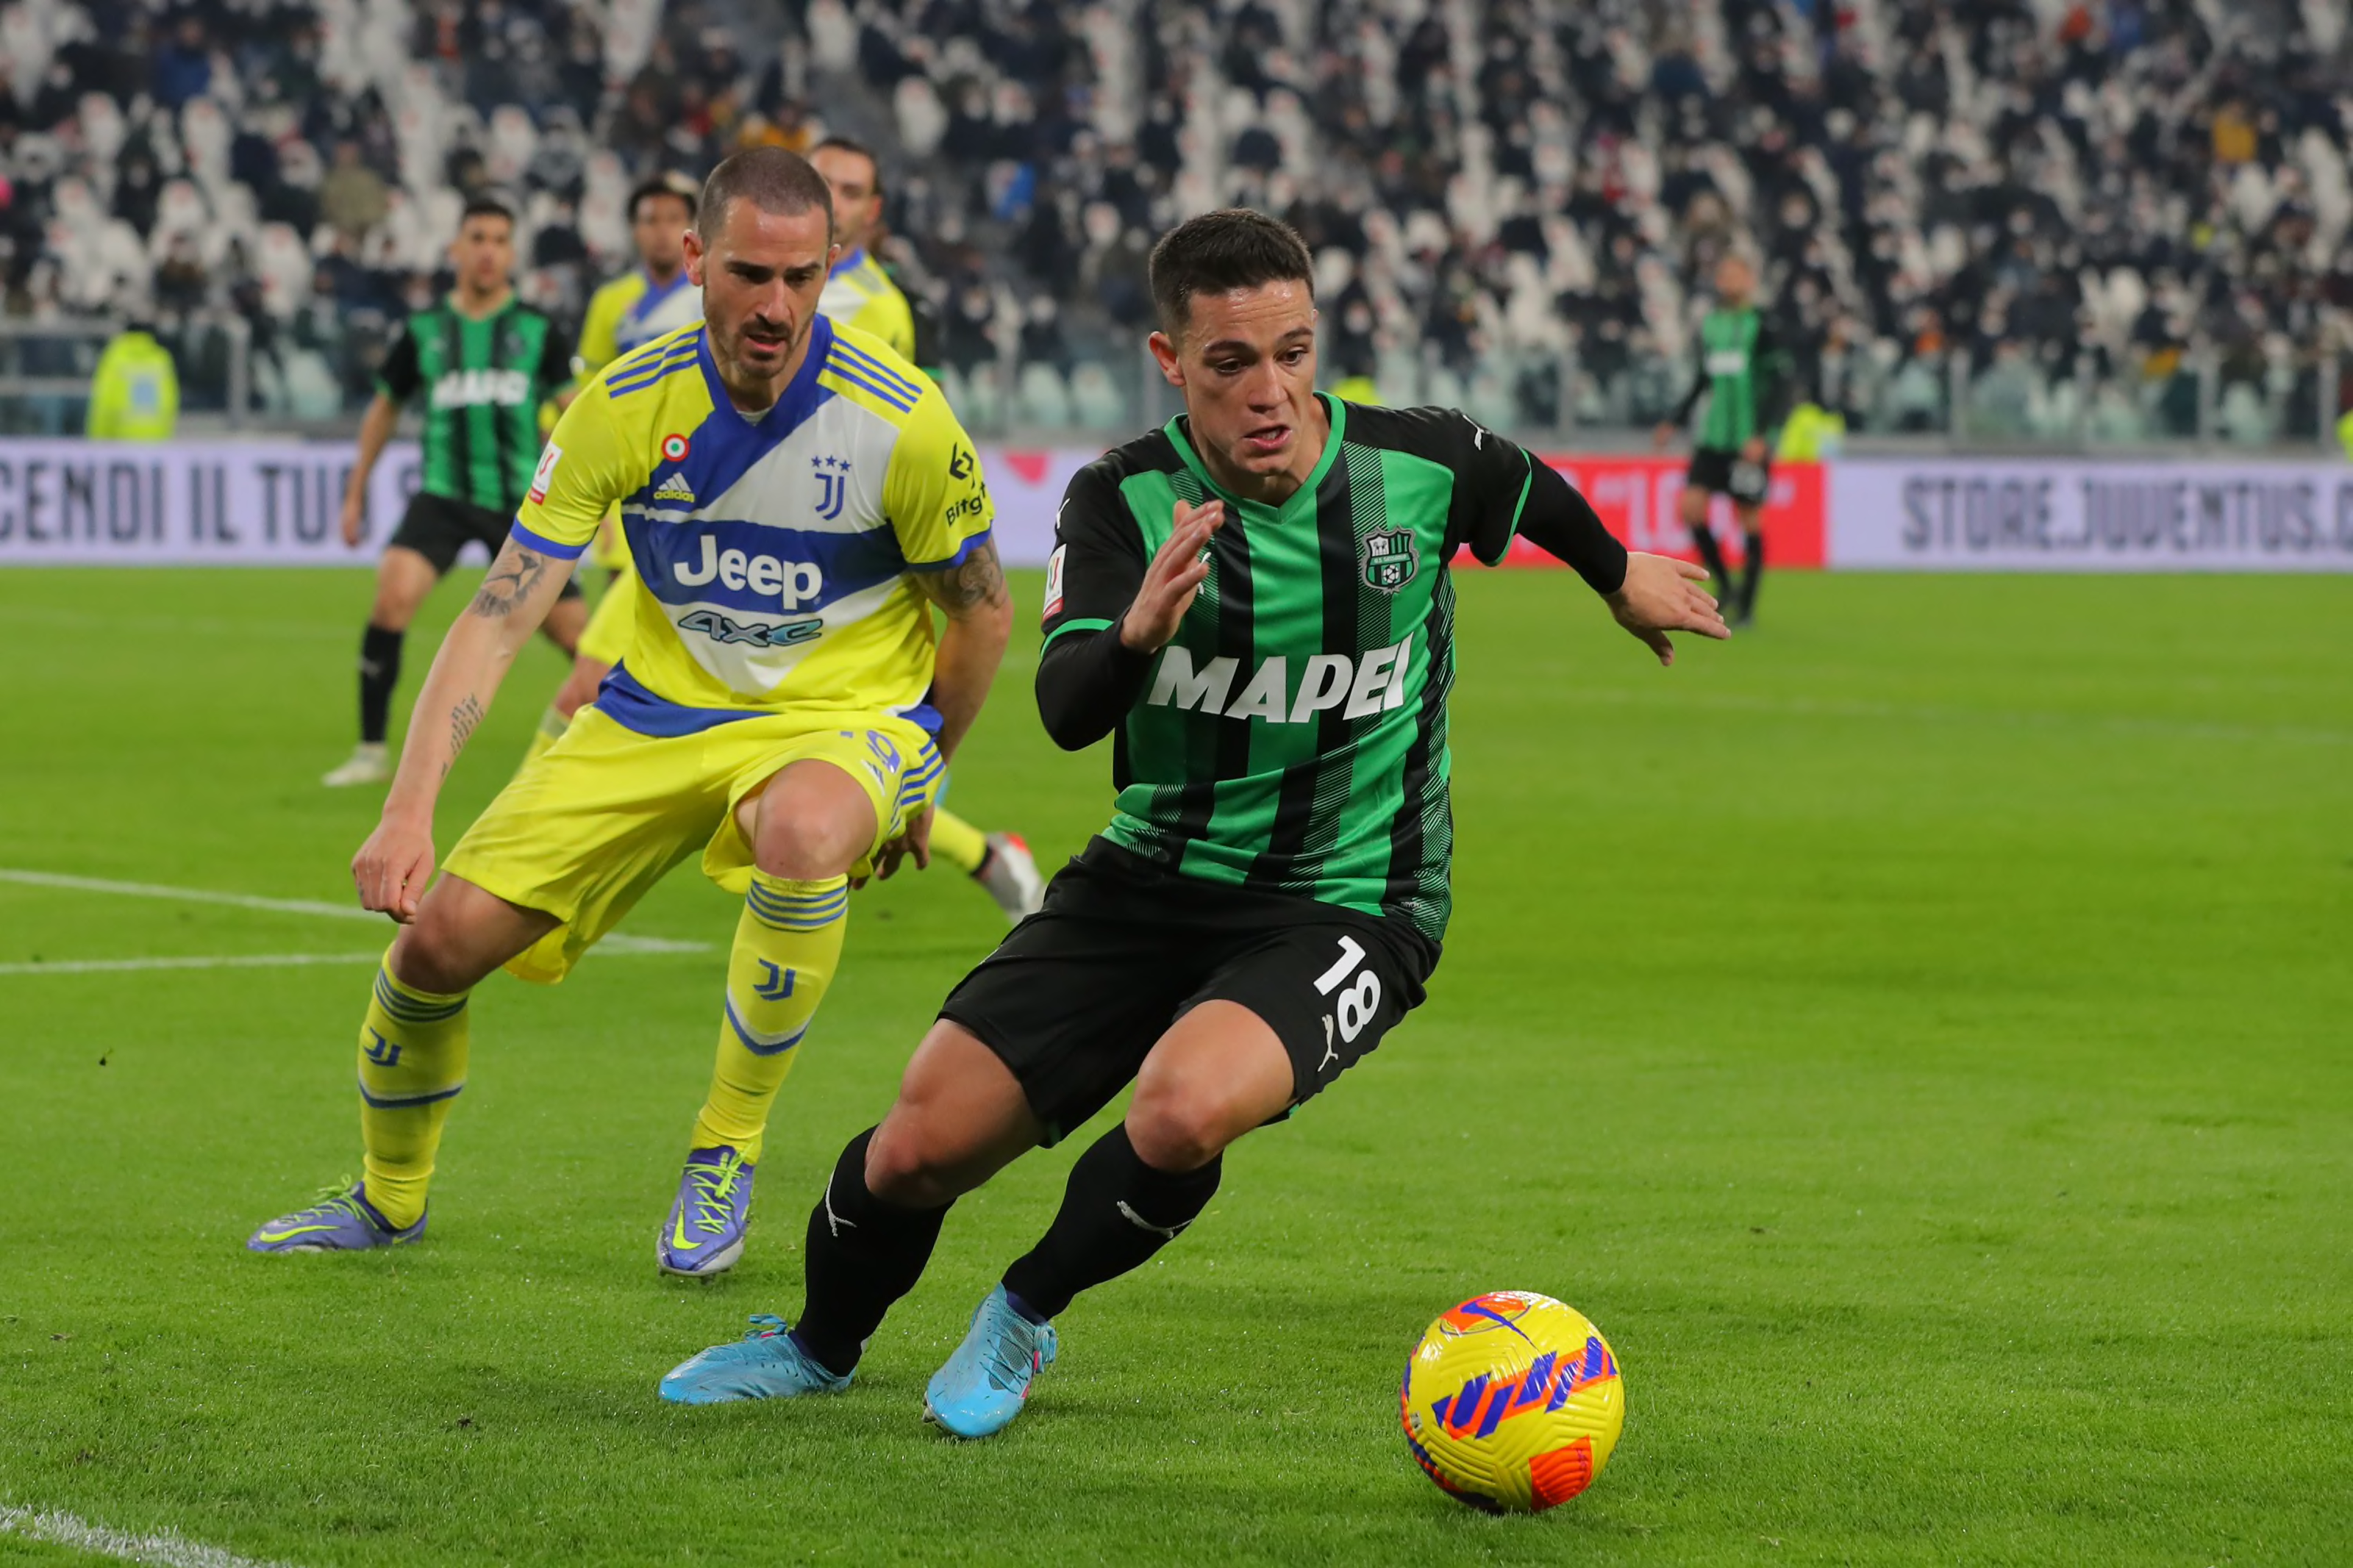 Sassuolo vs Juventus Preview: How to Watch, Team News & Prediction